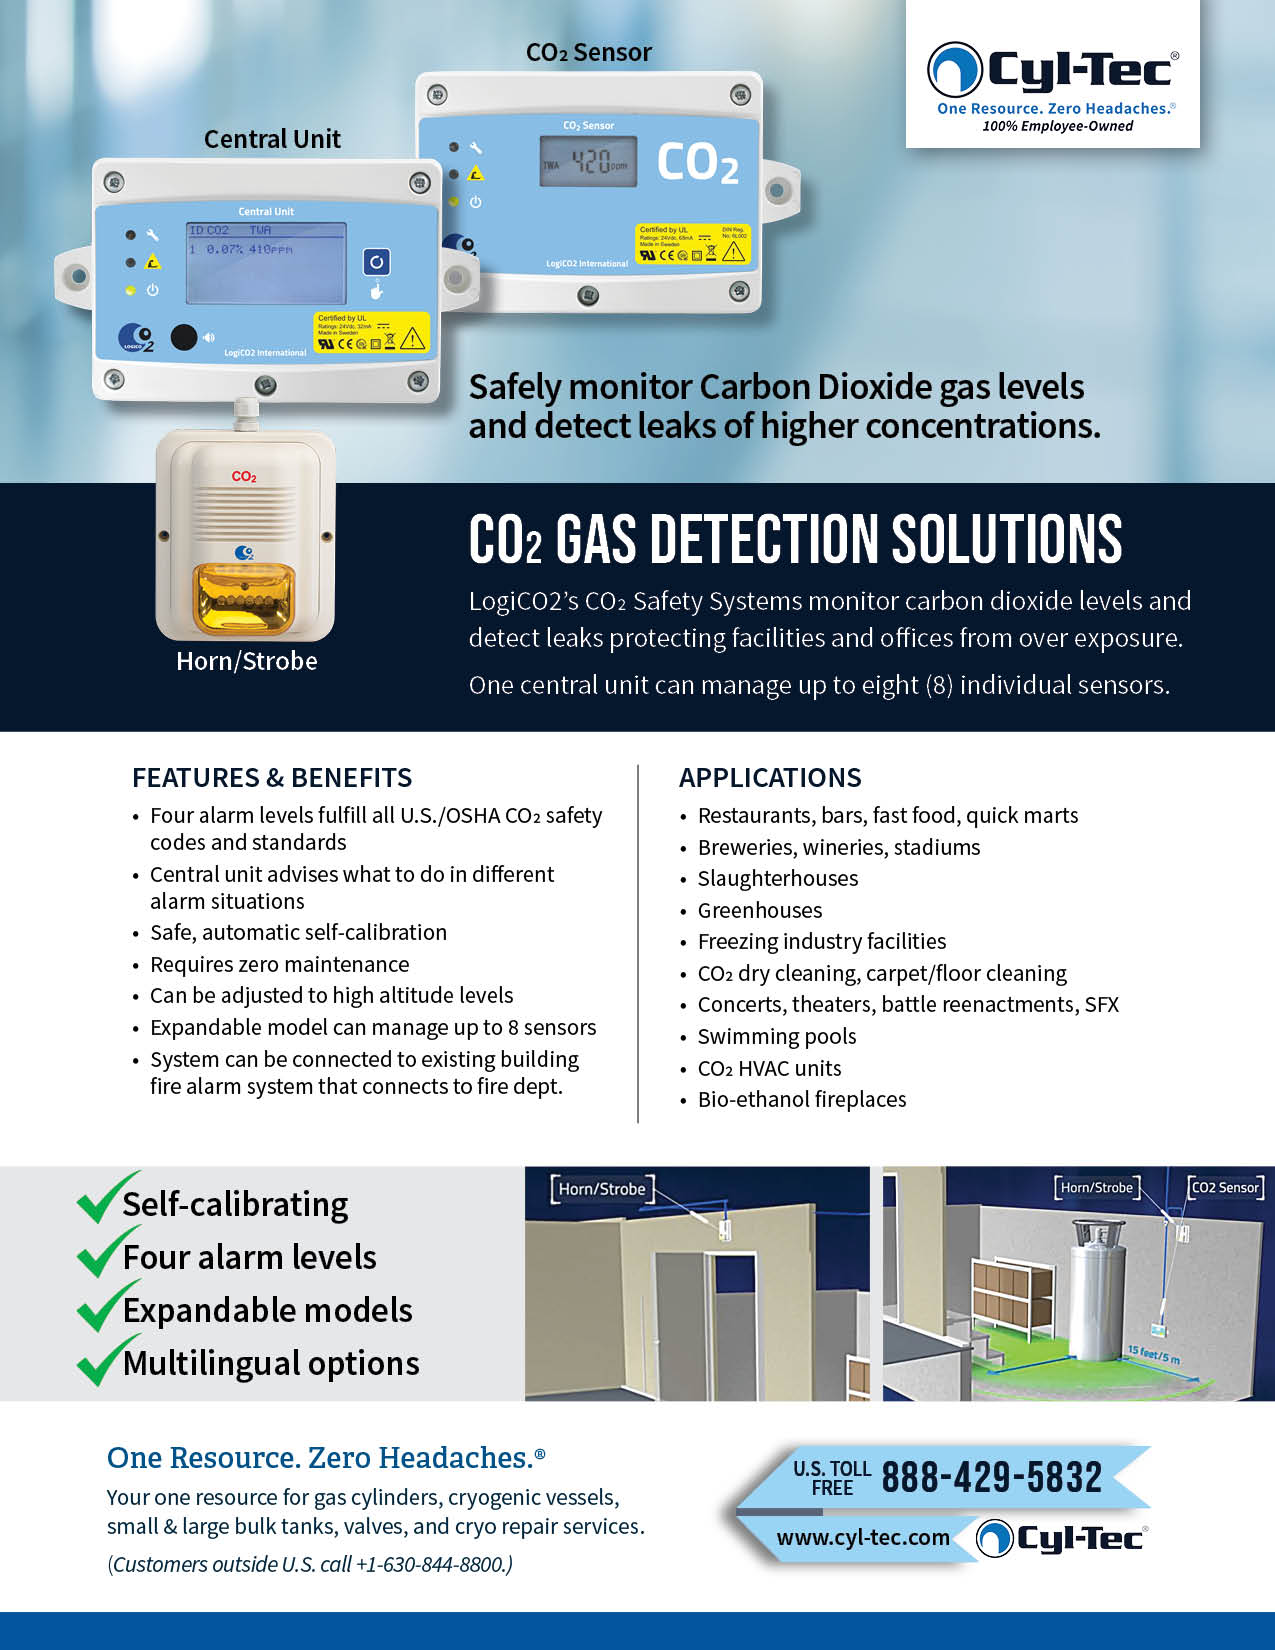 CO2 Gas Detection Solutions